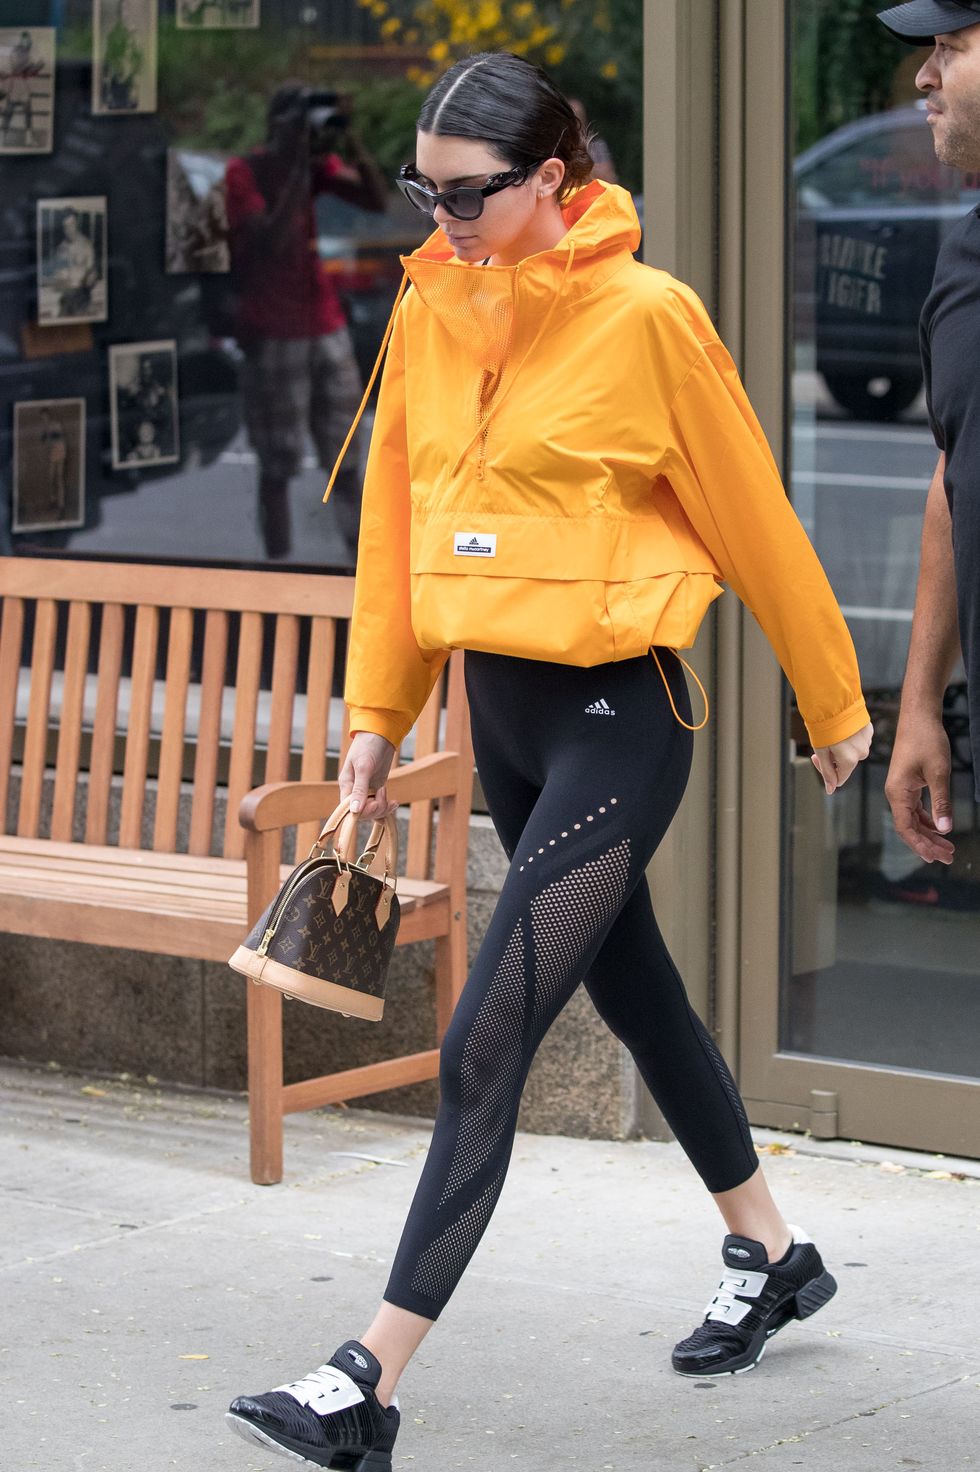 Kendall Jenner sports bright yellow jacket at an NYC gym